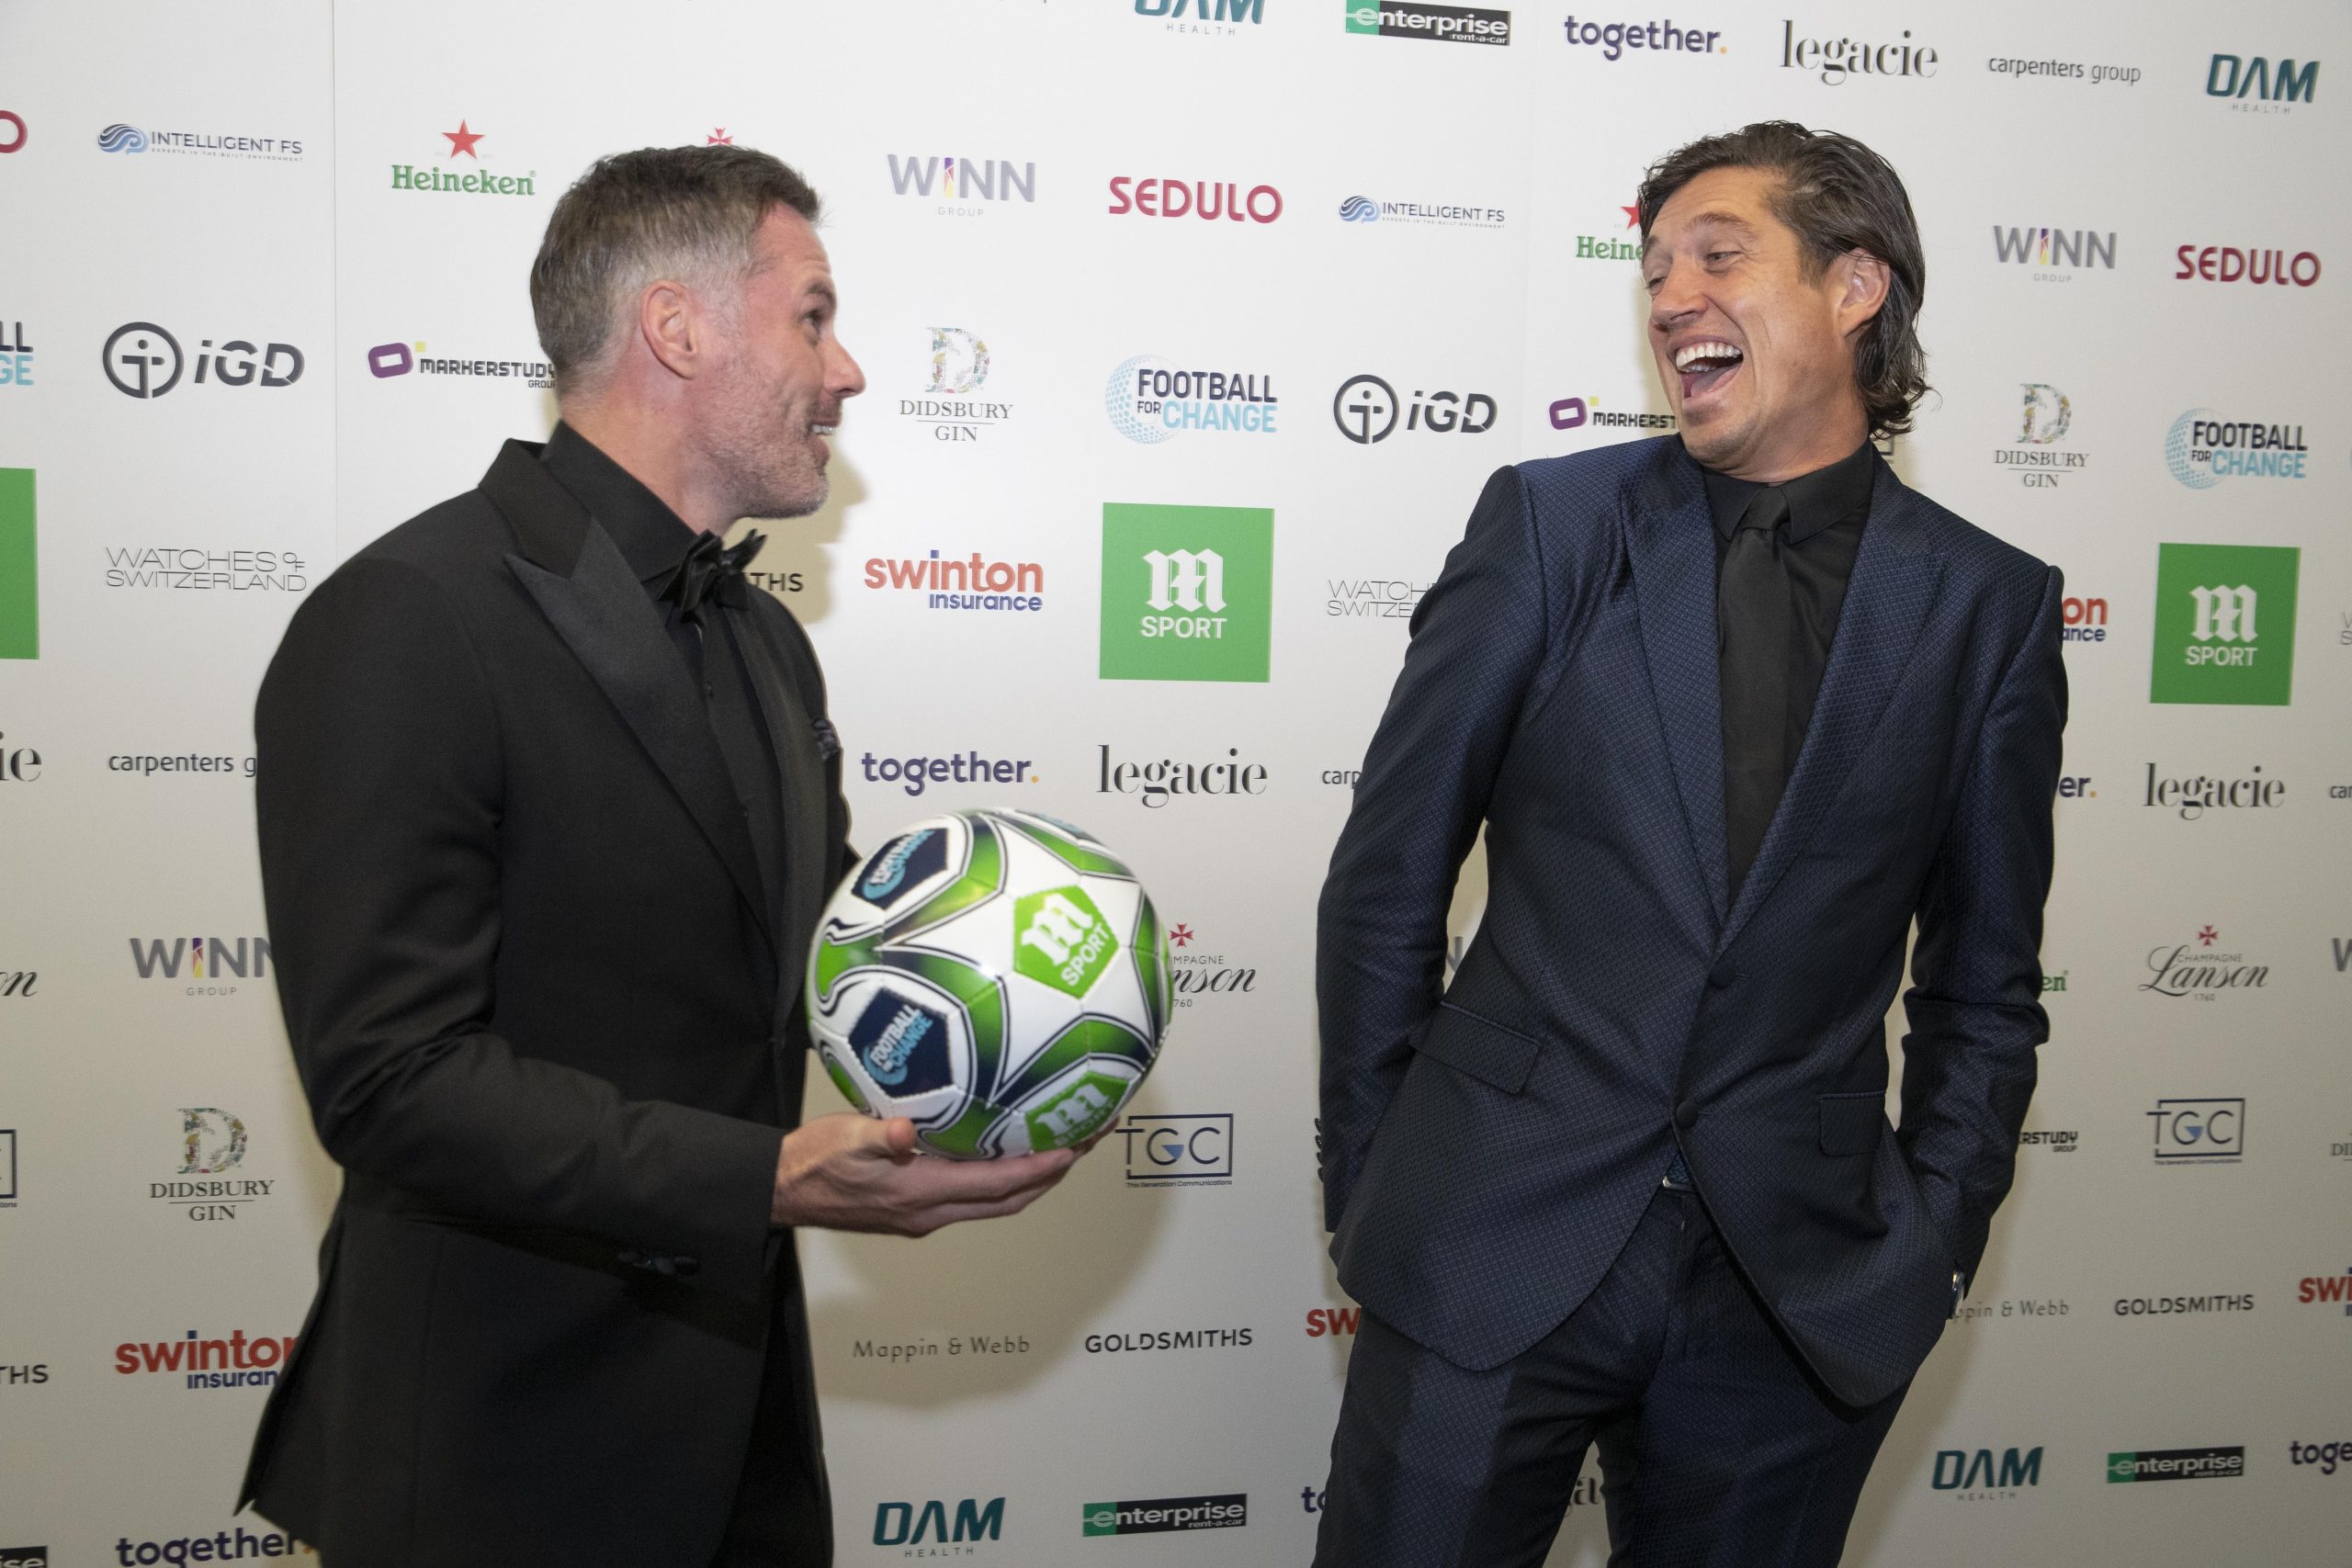 Jamie Carragher and Noel Gallagher raise £350,000 at 2022 Football for Change gala